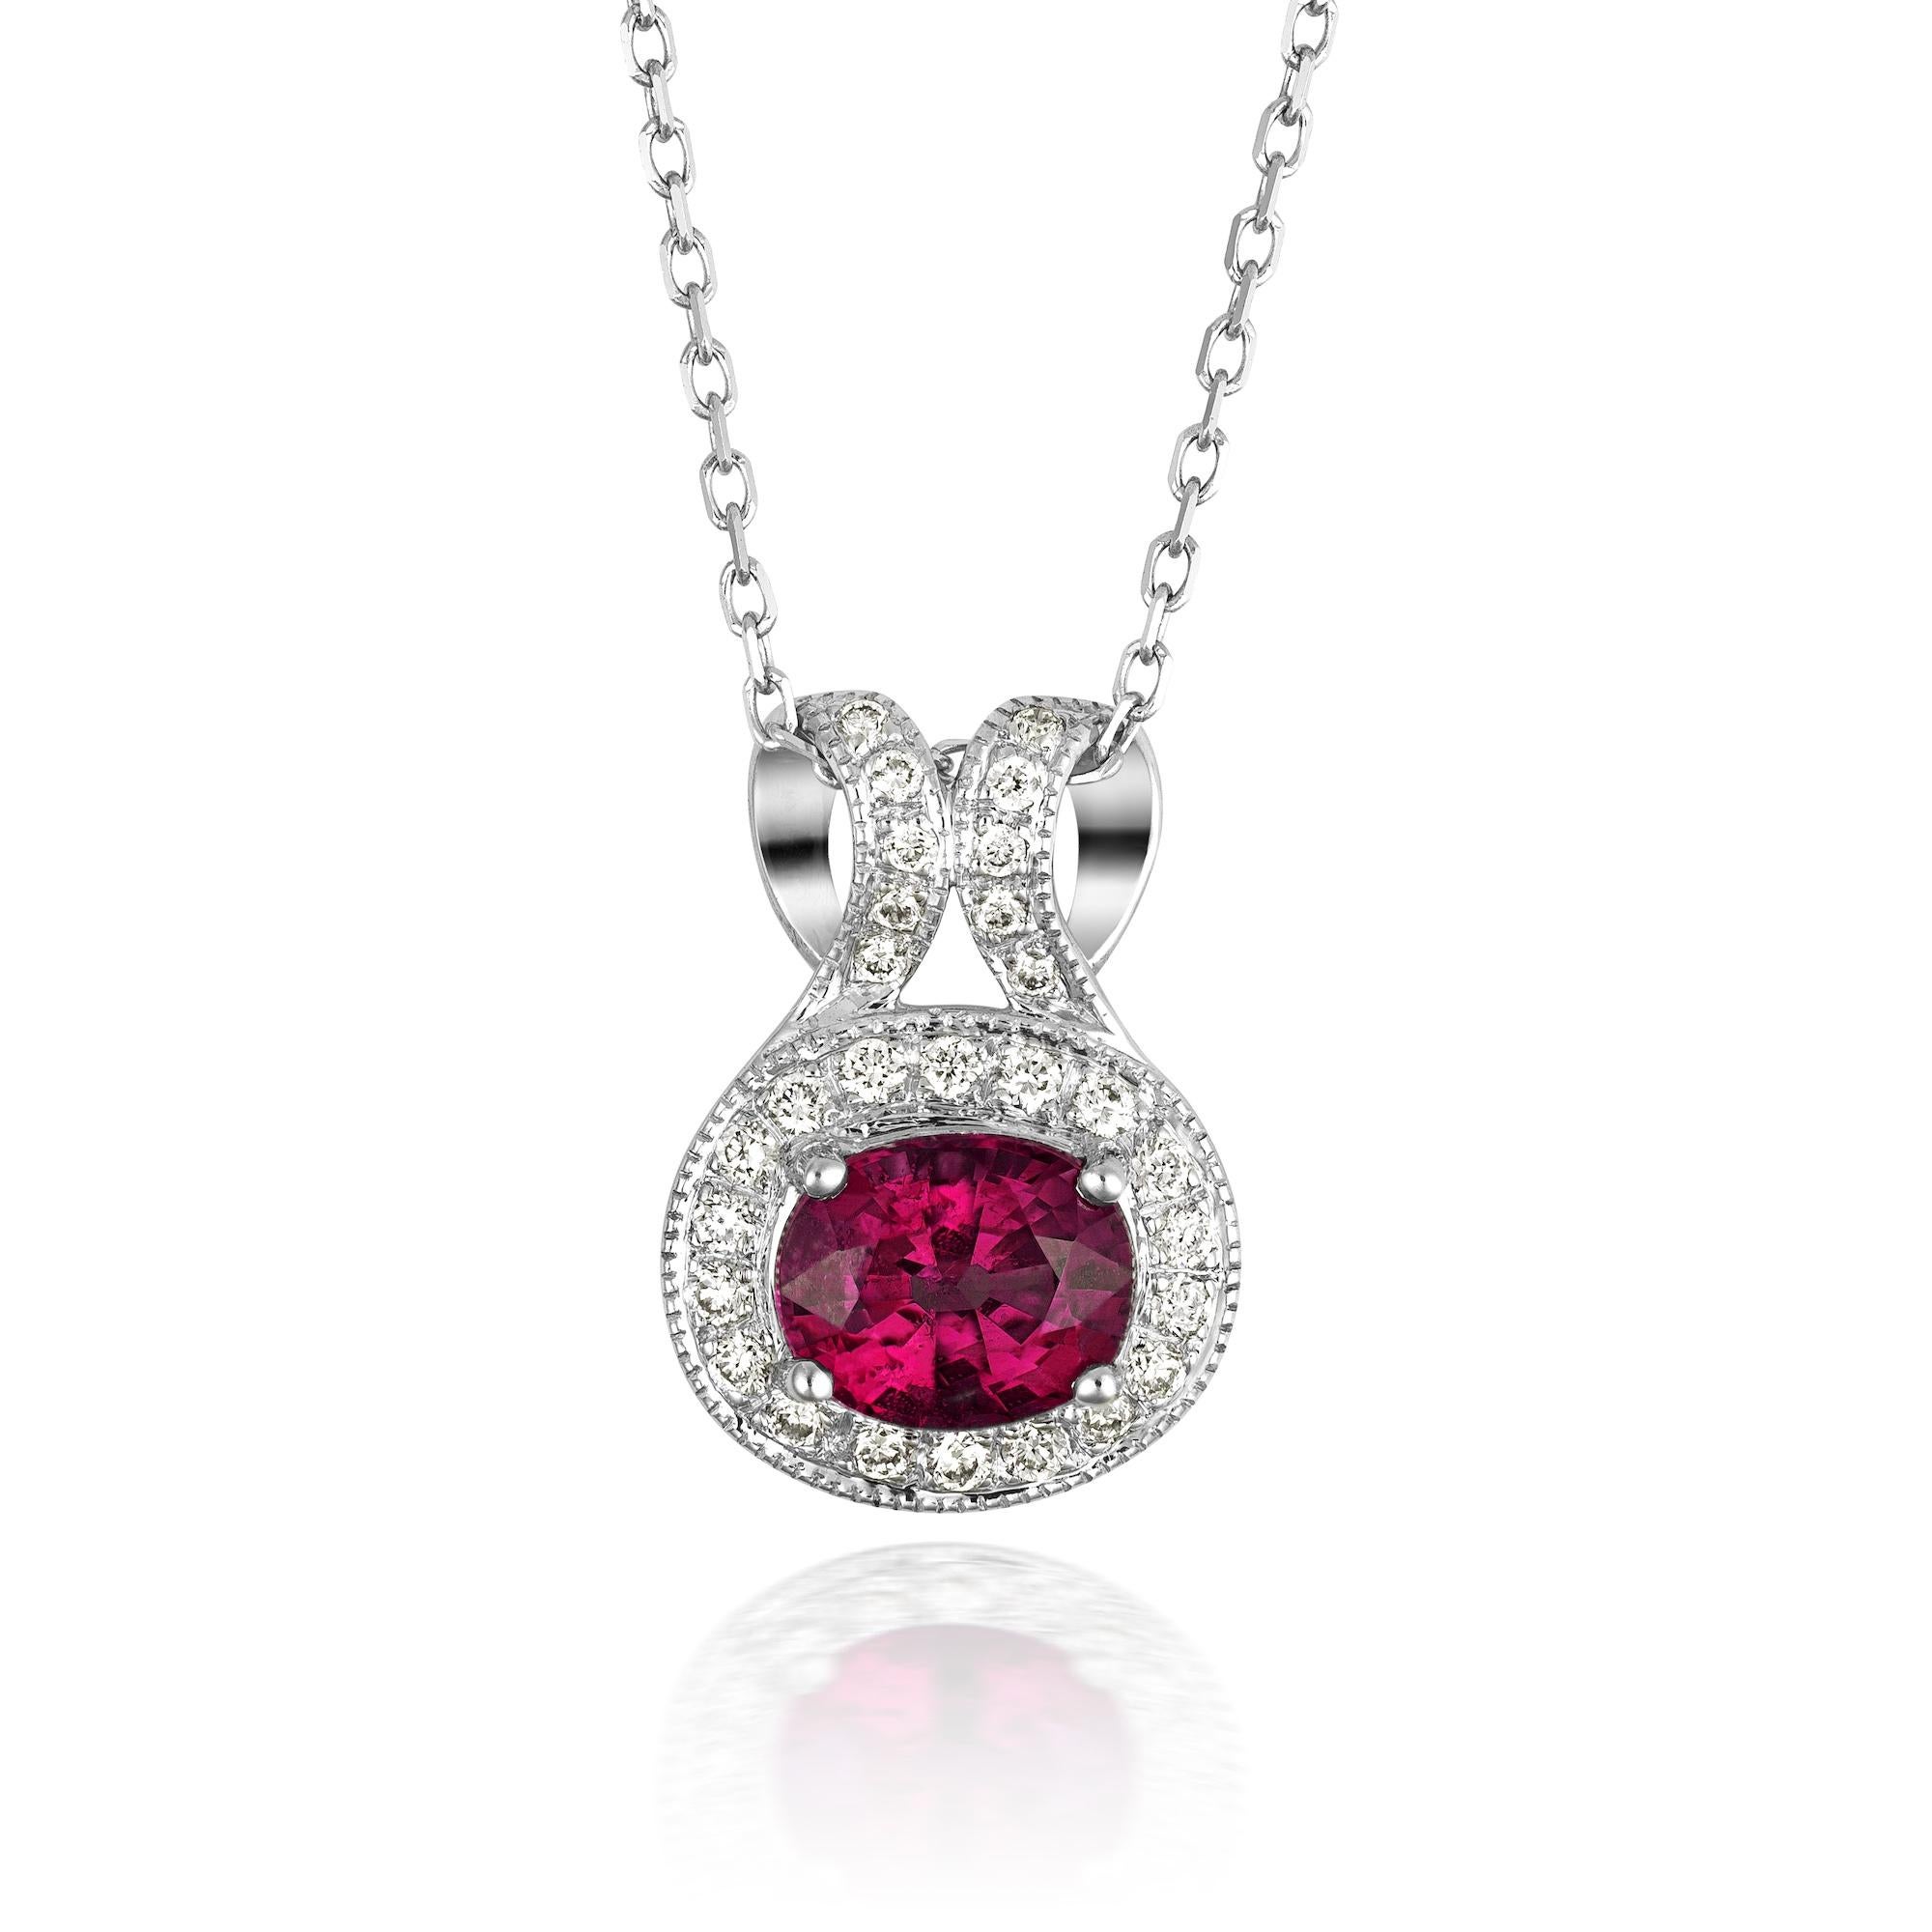 0.70 Carats Rubellite Diamonds set in 14K White Gold Pendant In New Condition For Sale In Los Angeles, CA